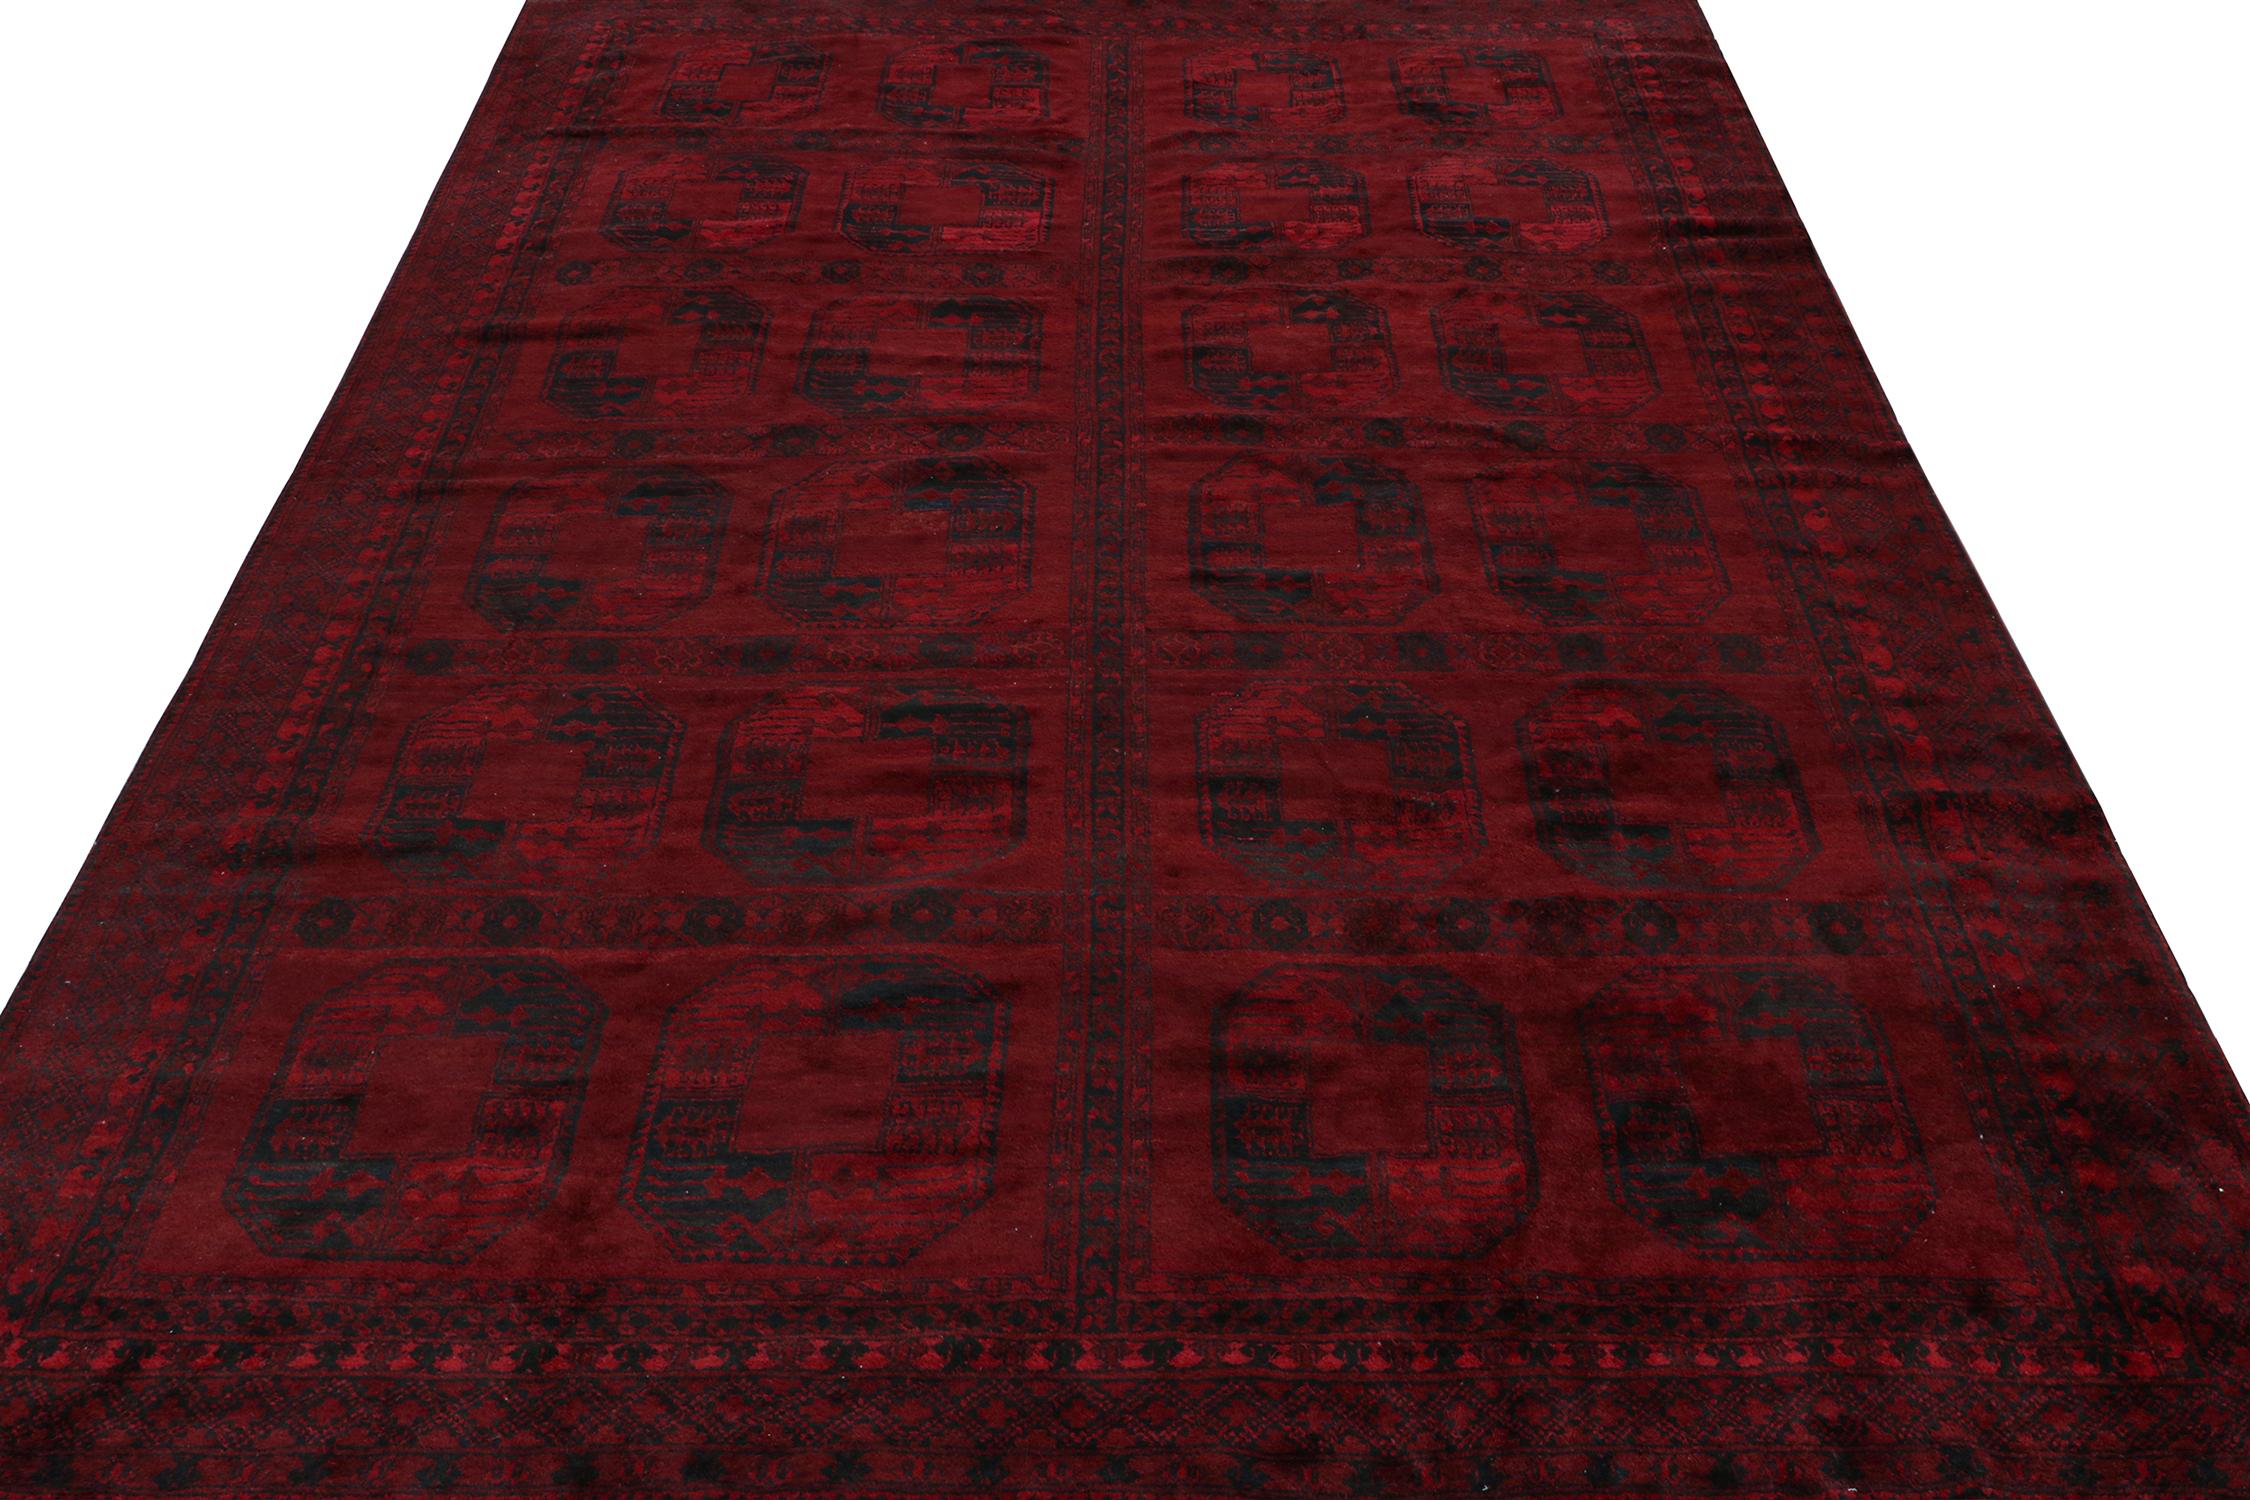 Persian Antique Afghan Bokhara Rug in Burgundy Red and Black Medallions by Rug & Kilim For Sale